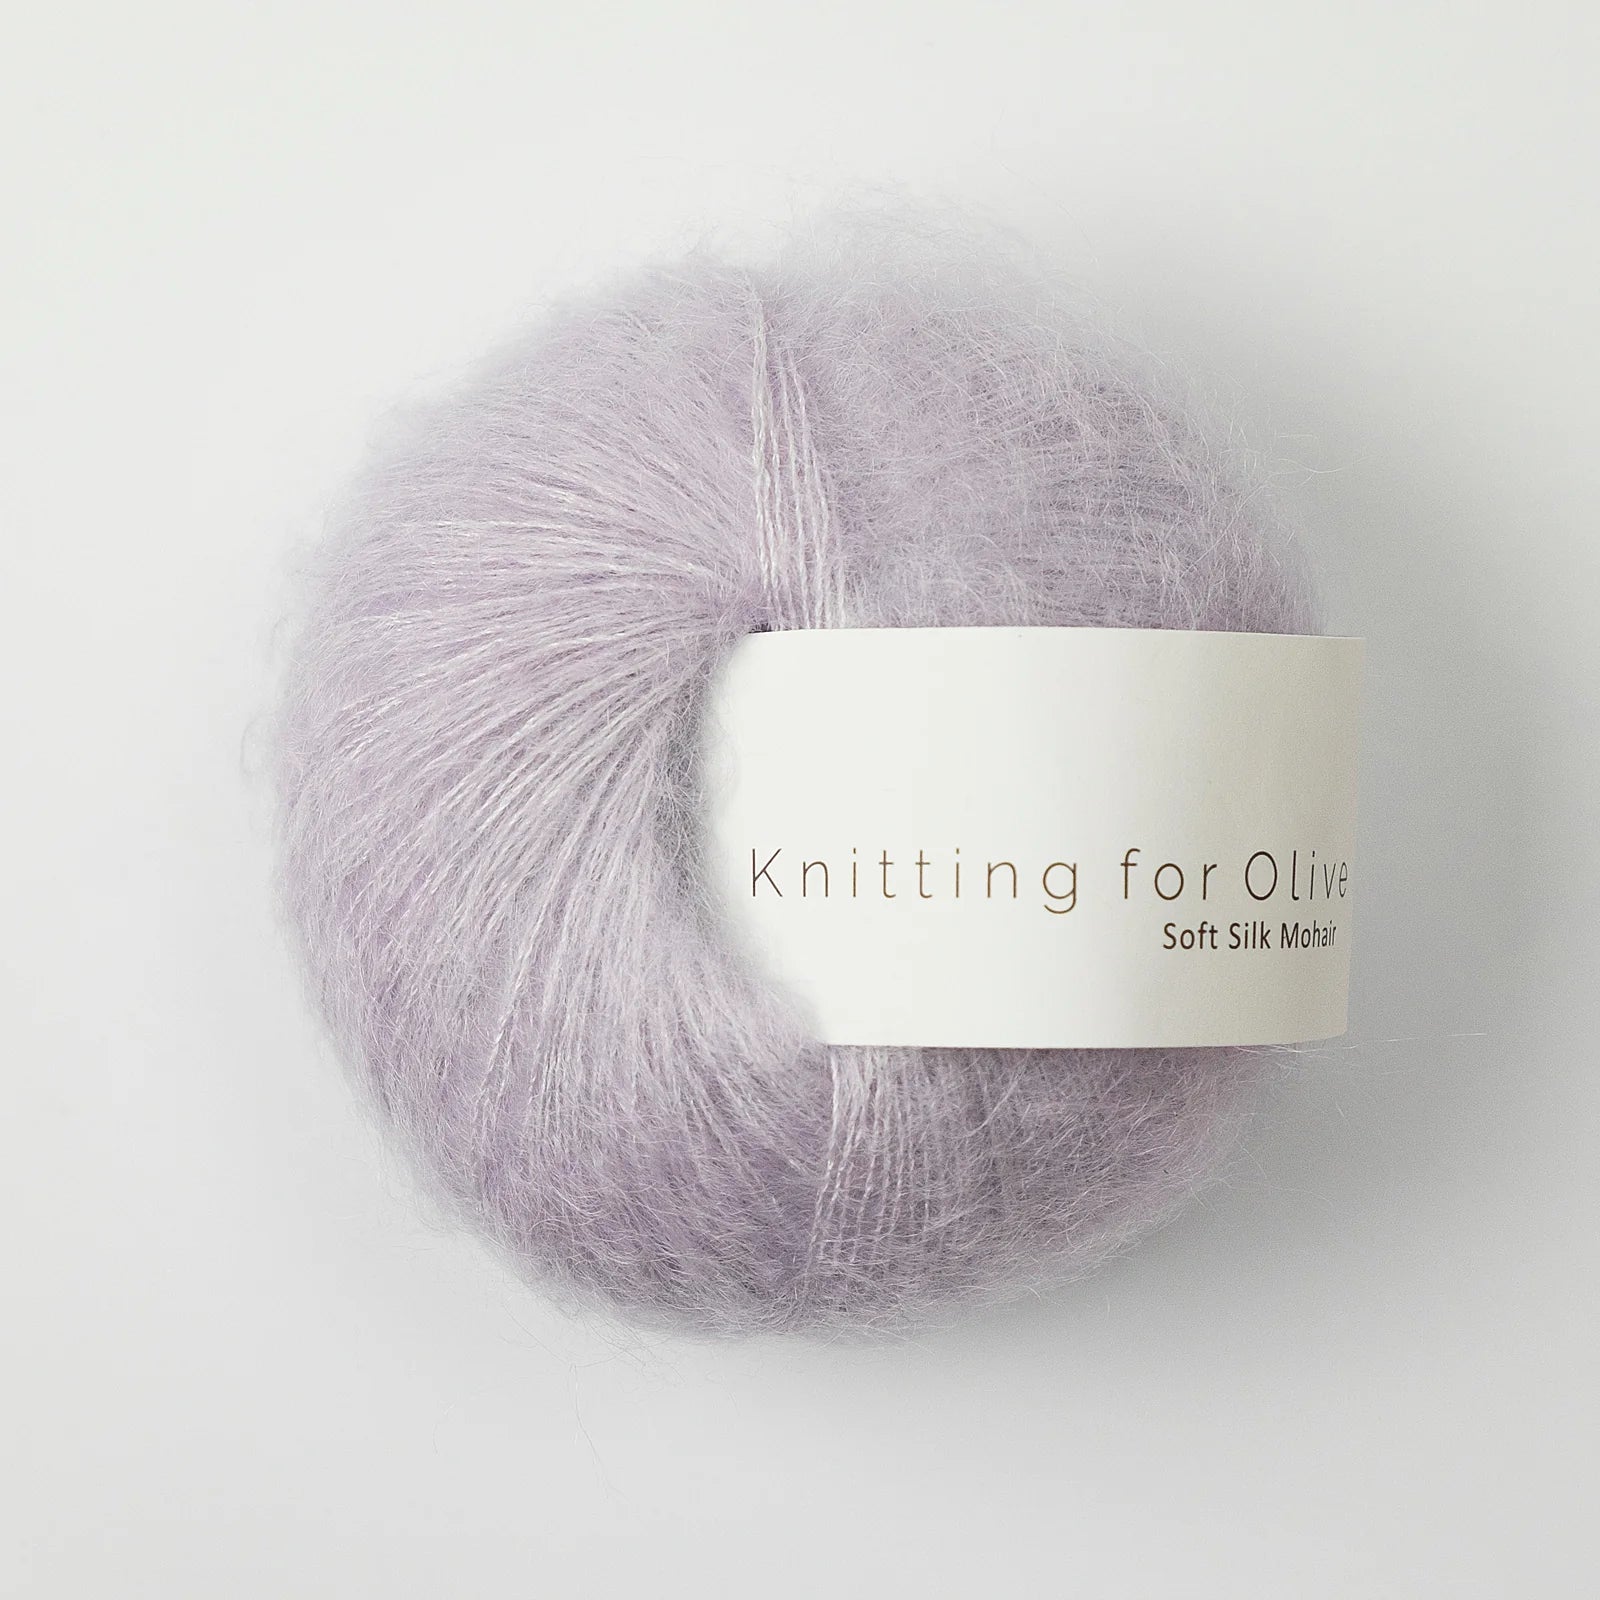 Knitting for Olive Soft Silk Mohair - Knitting for Olive - Unicorn Purple - The Little Yarn Store